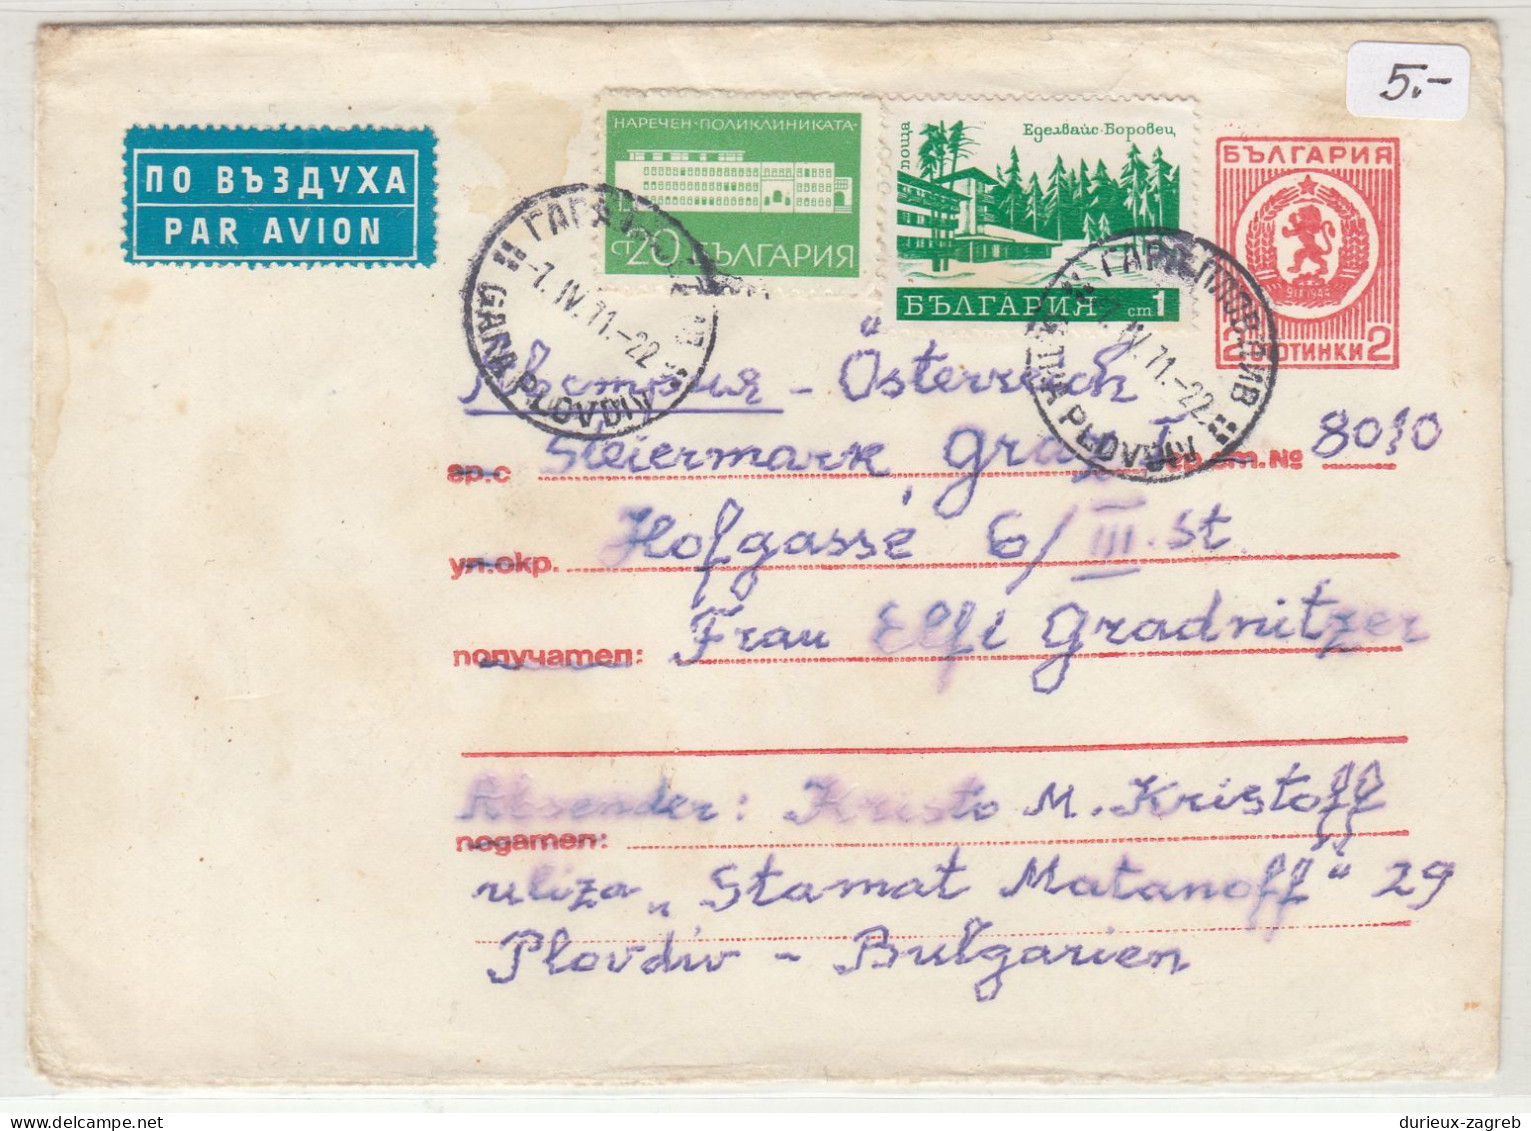 Bulgaria Postal Stationery Letter Cover Posted Air Mail 1971 Plovdiv To Graz - Uprated B240401 - Omslagen